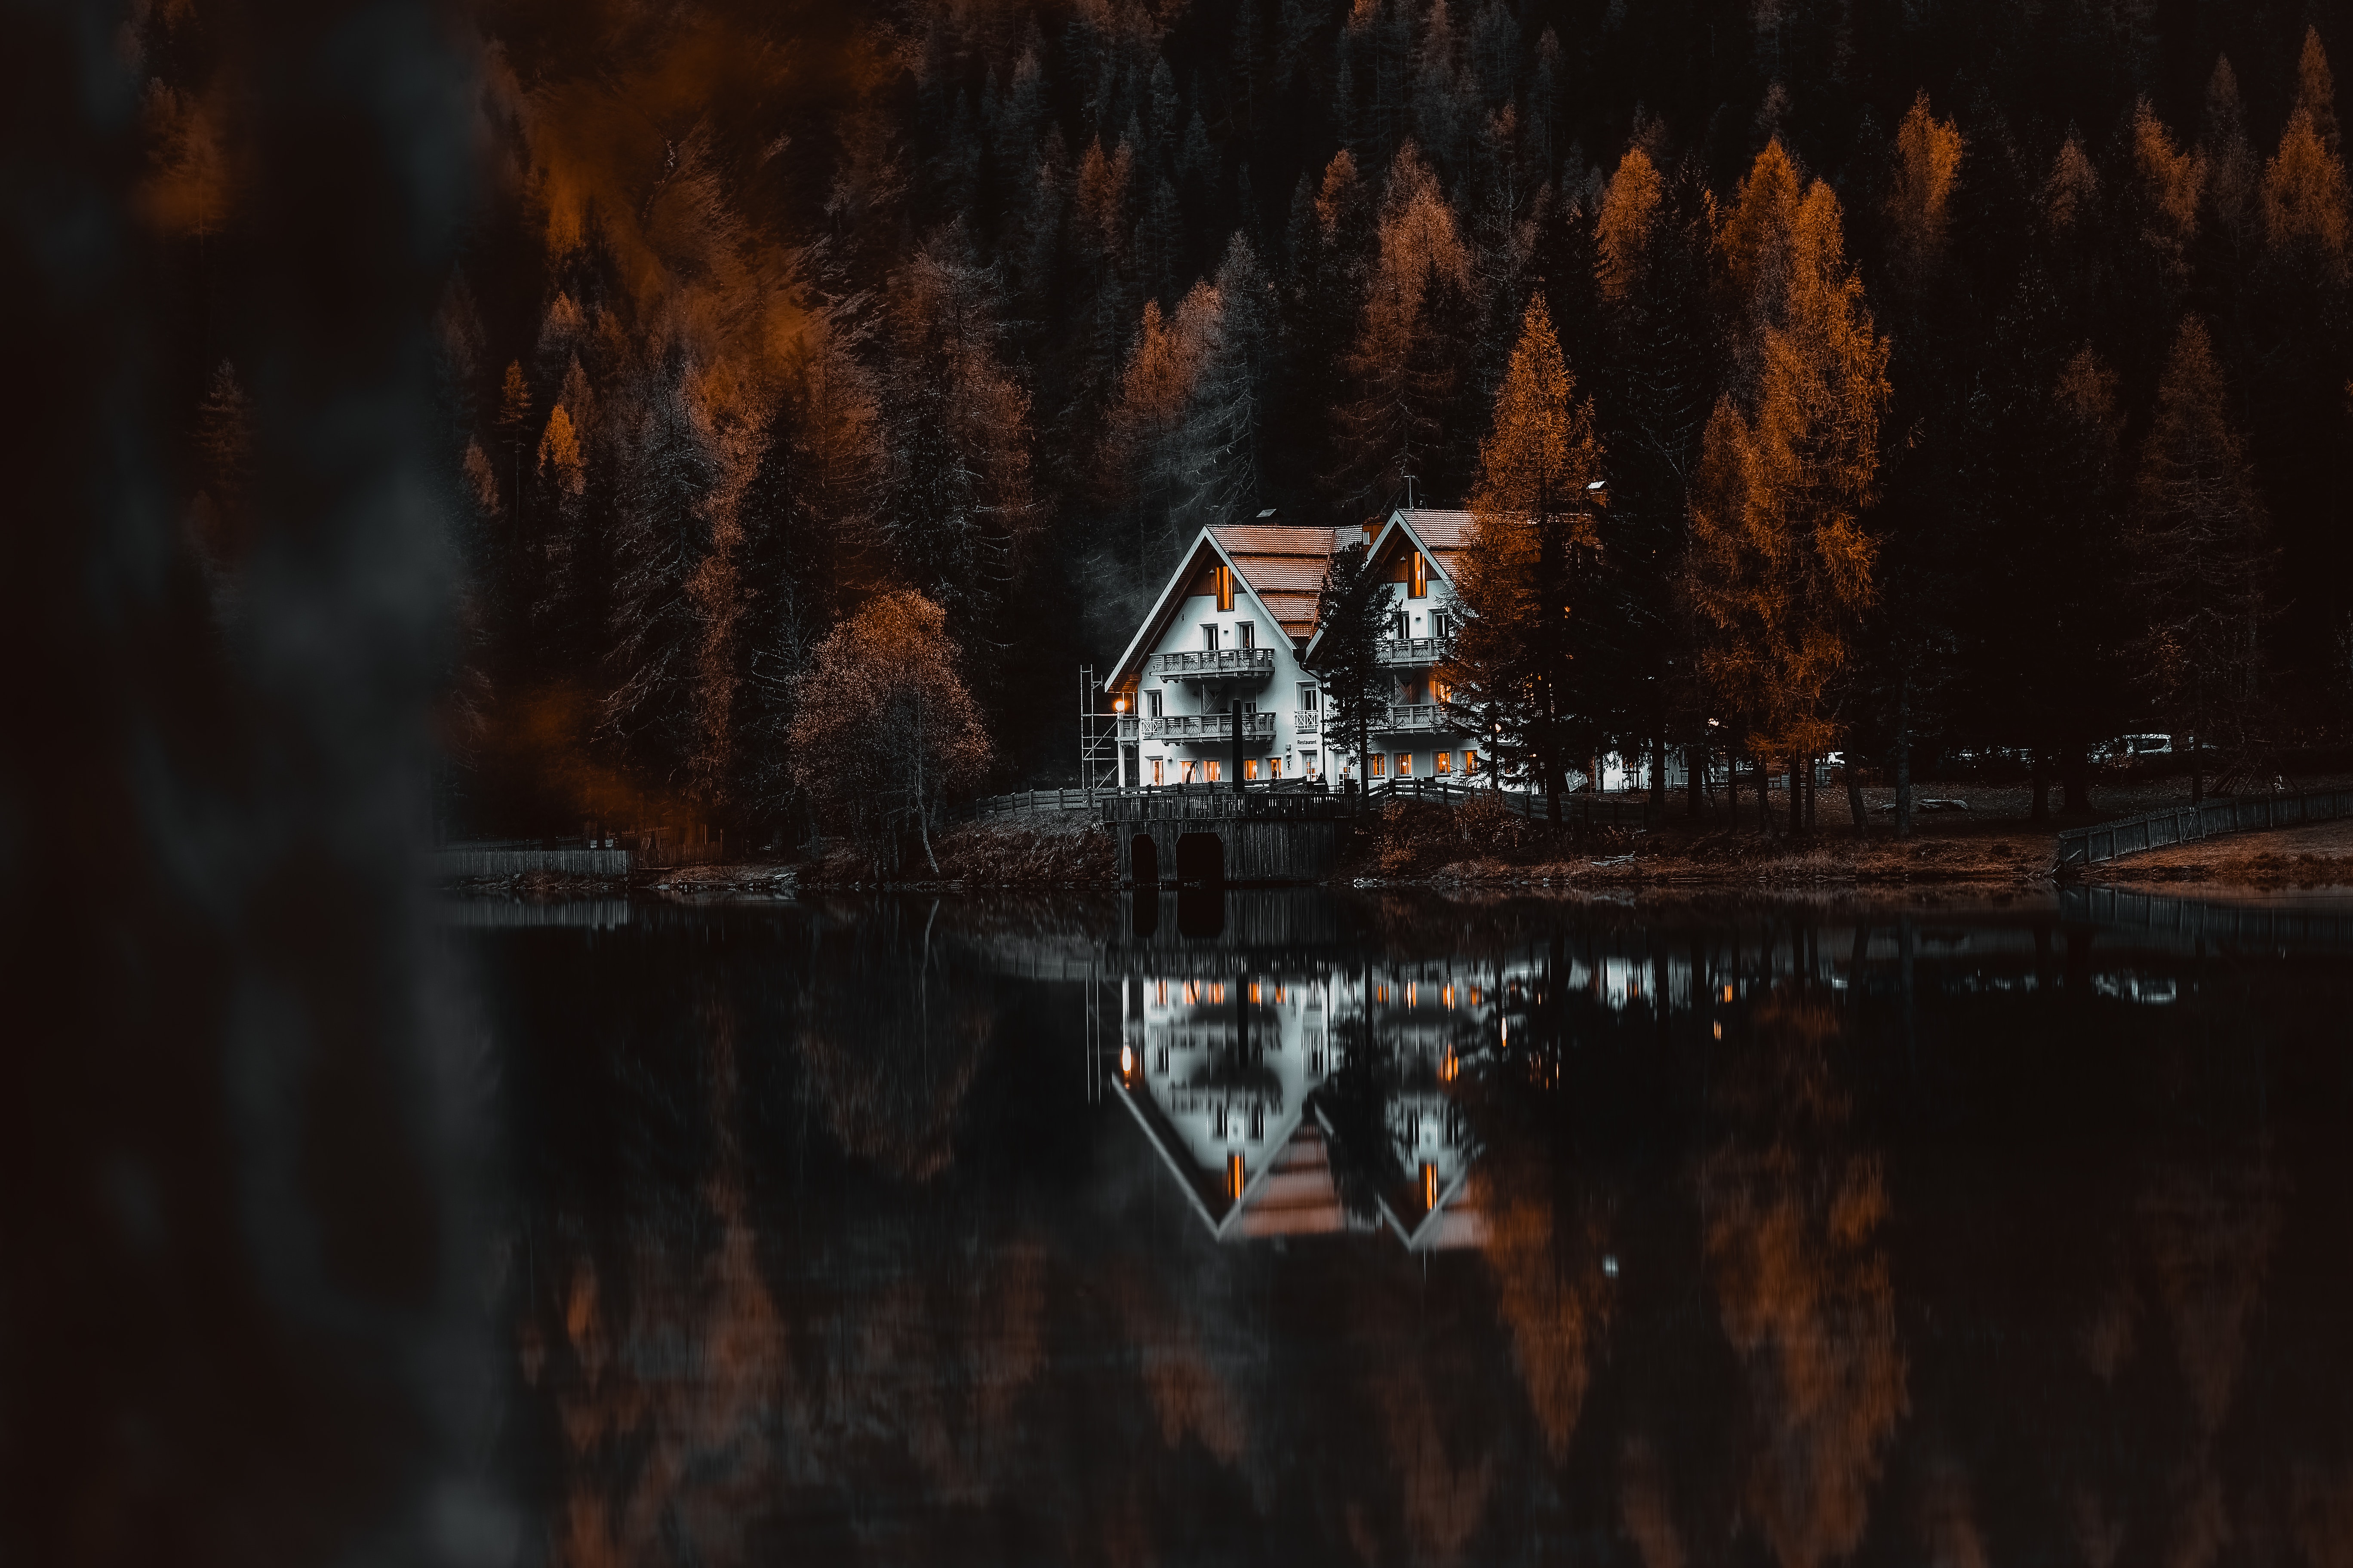 houses, lake, shore, small houses, forest, nature, bank images